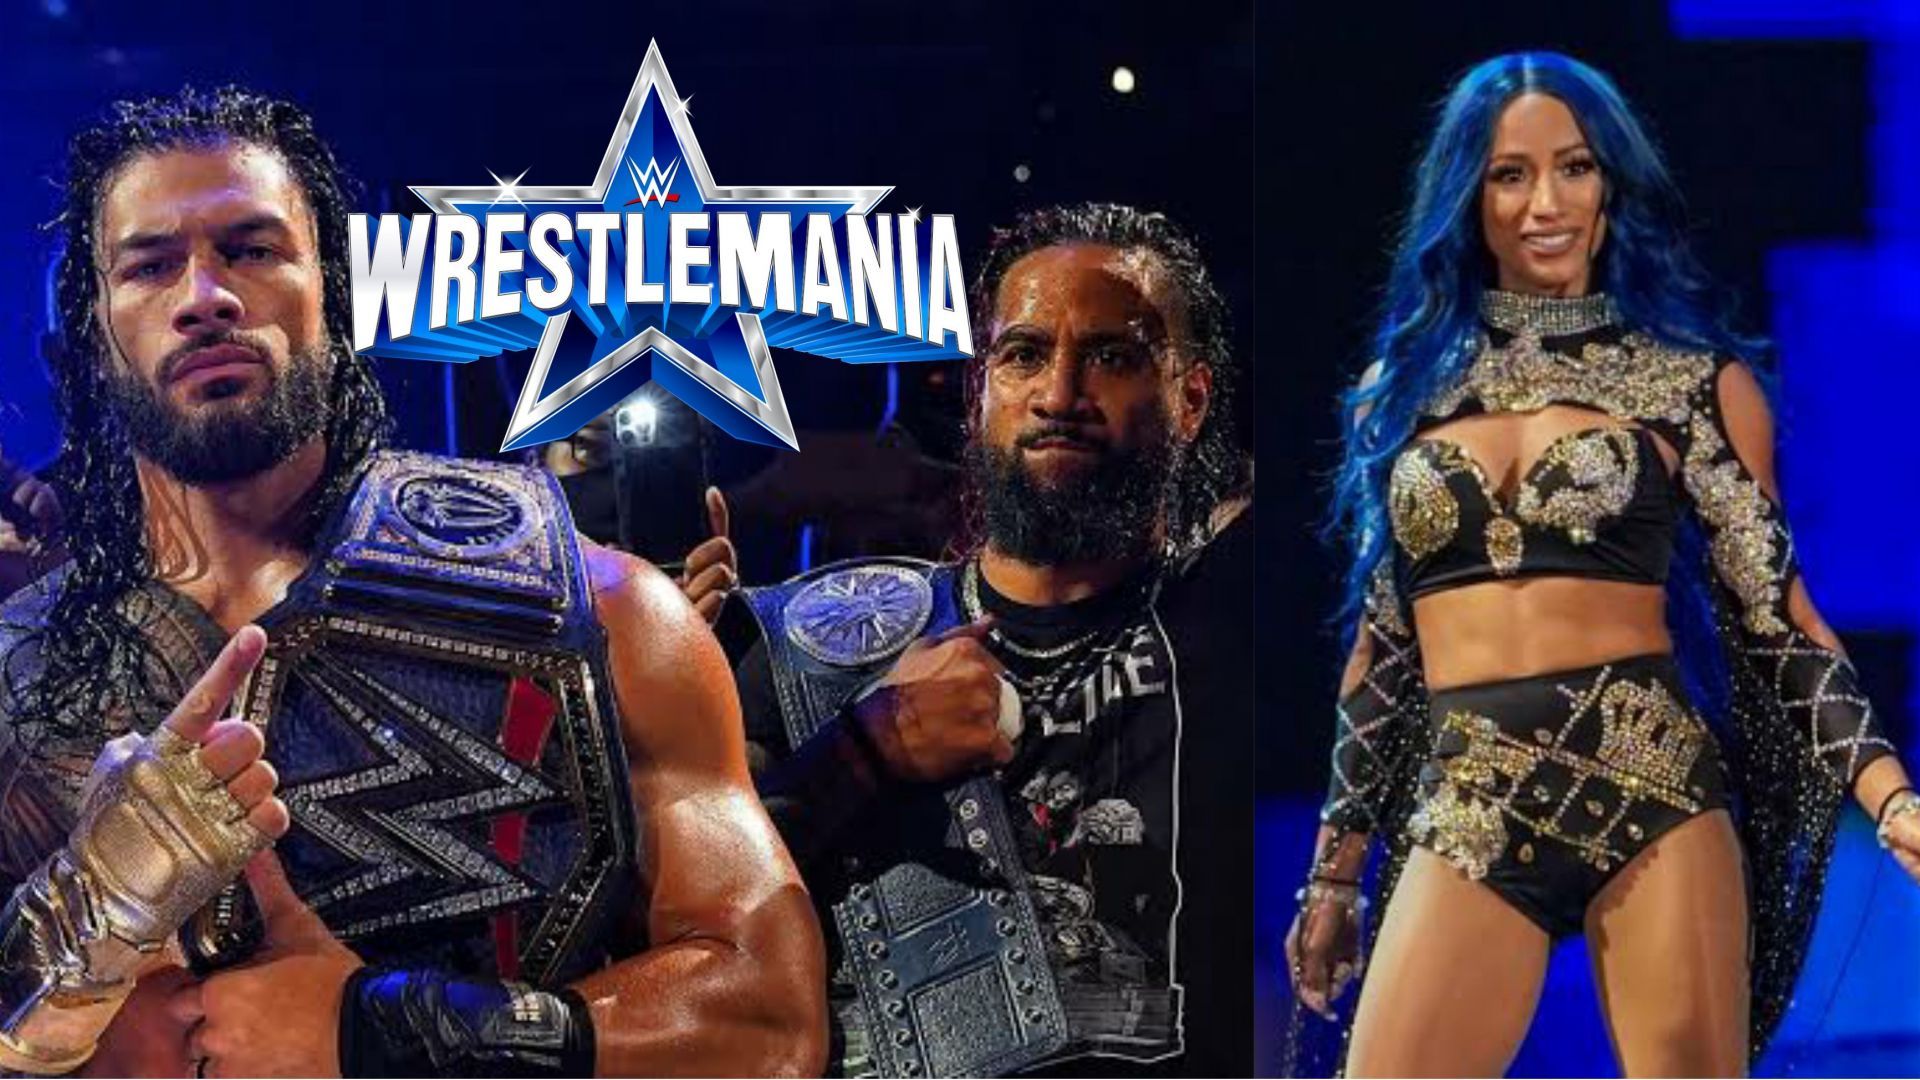 The Bloodline is dominant heading into WrestleMania 38.